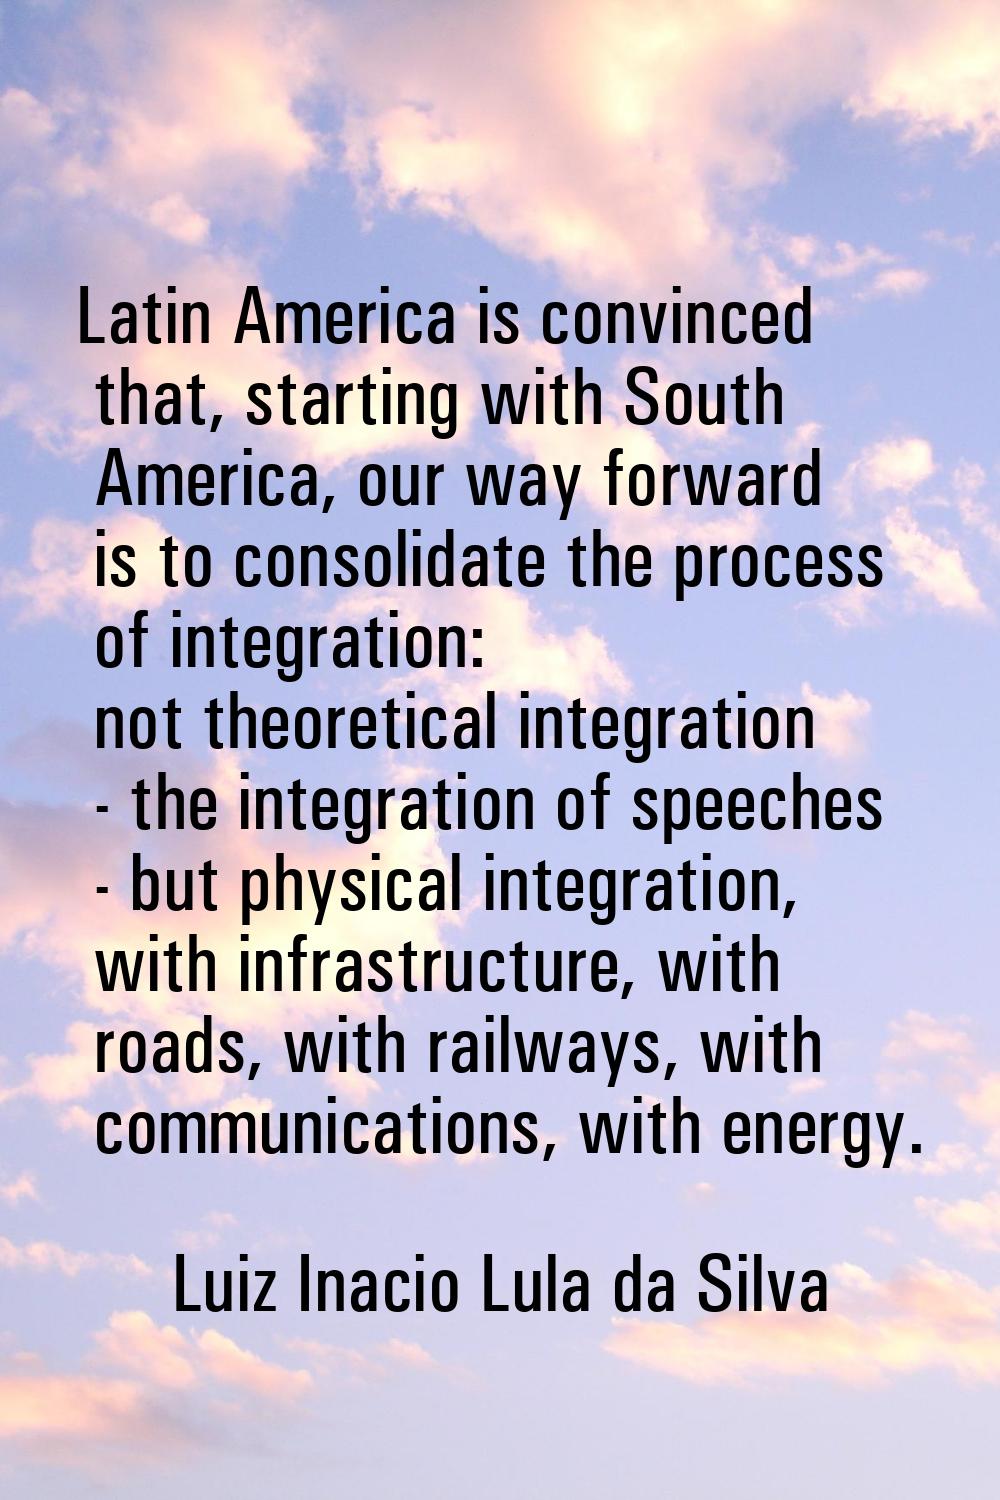 Latin America is convinced that, starting with South America, our way forward is to consolidate the